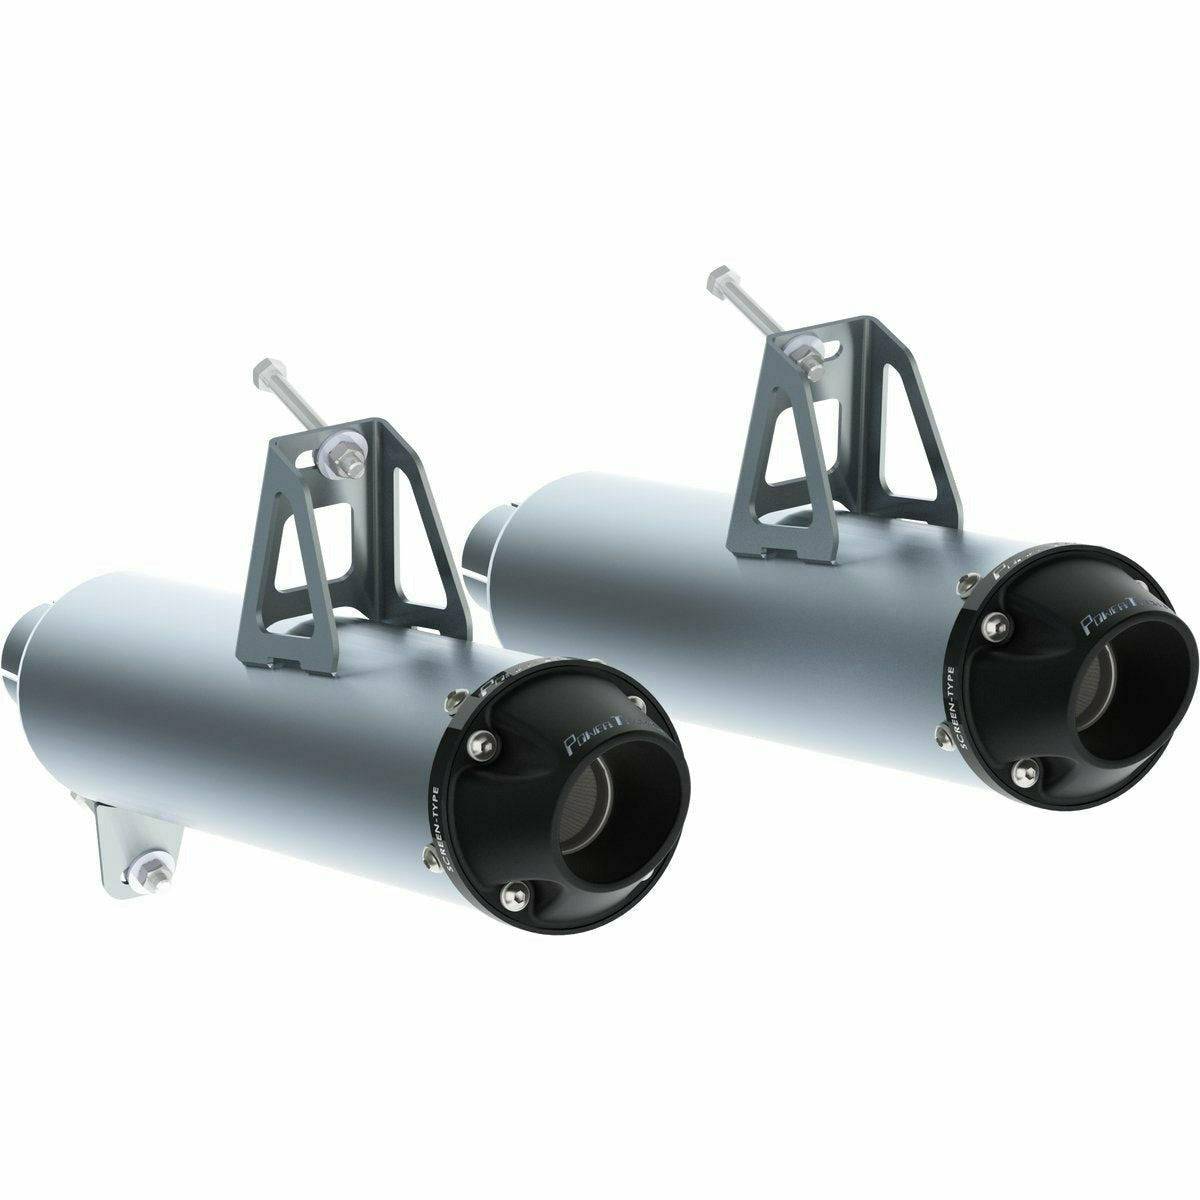 MBRP Can Am Maverick Turbo (2015-2016) Performance Series Slip On Exhaust